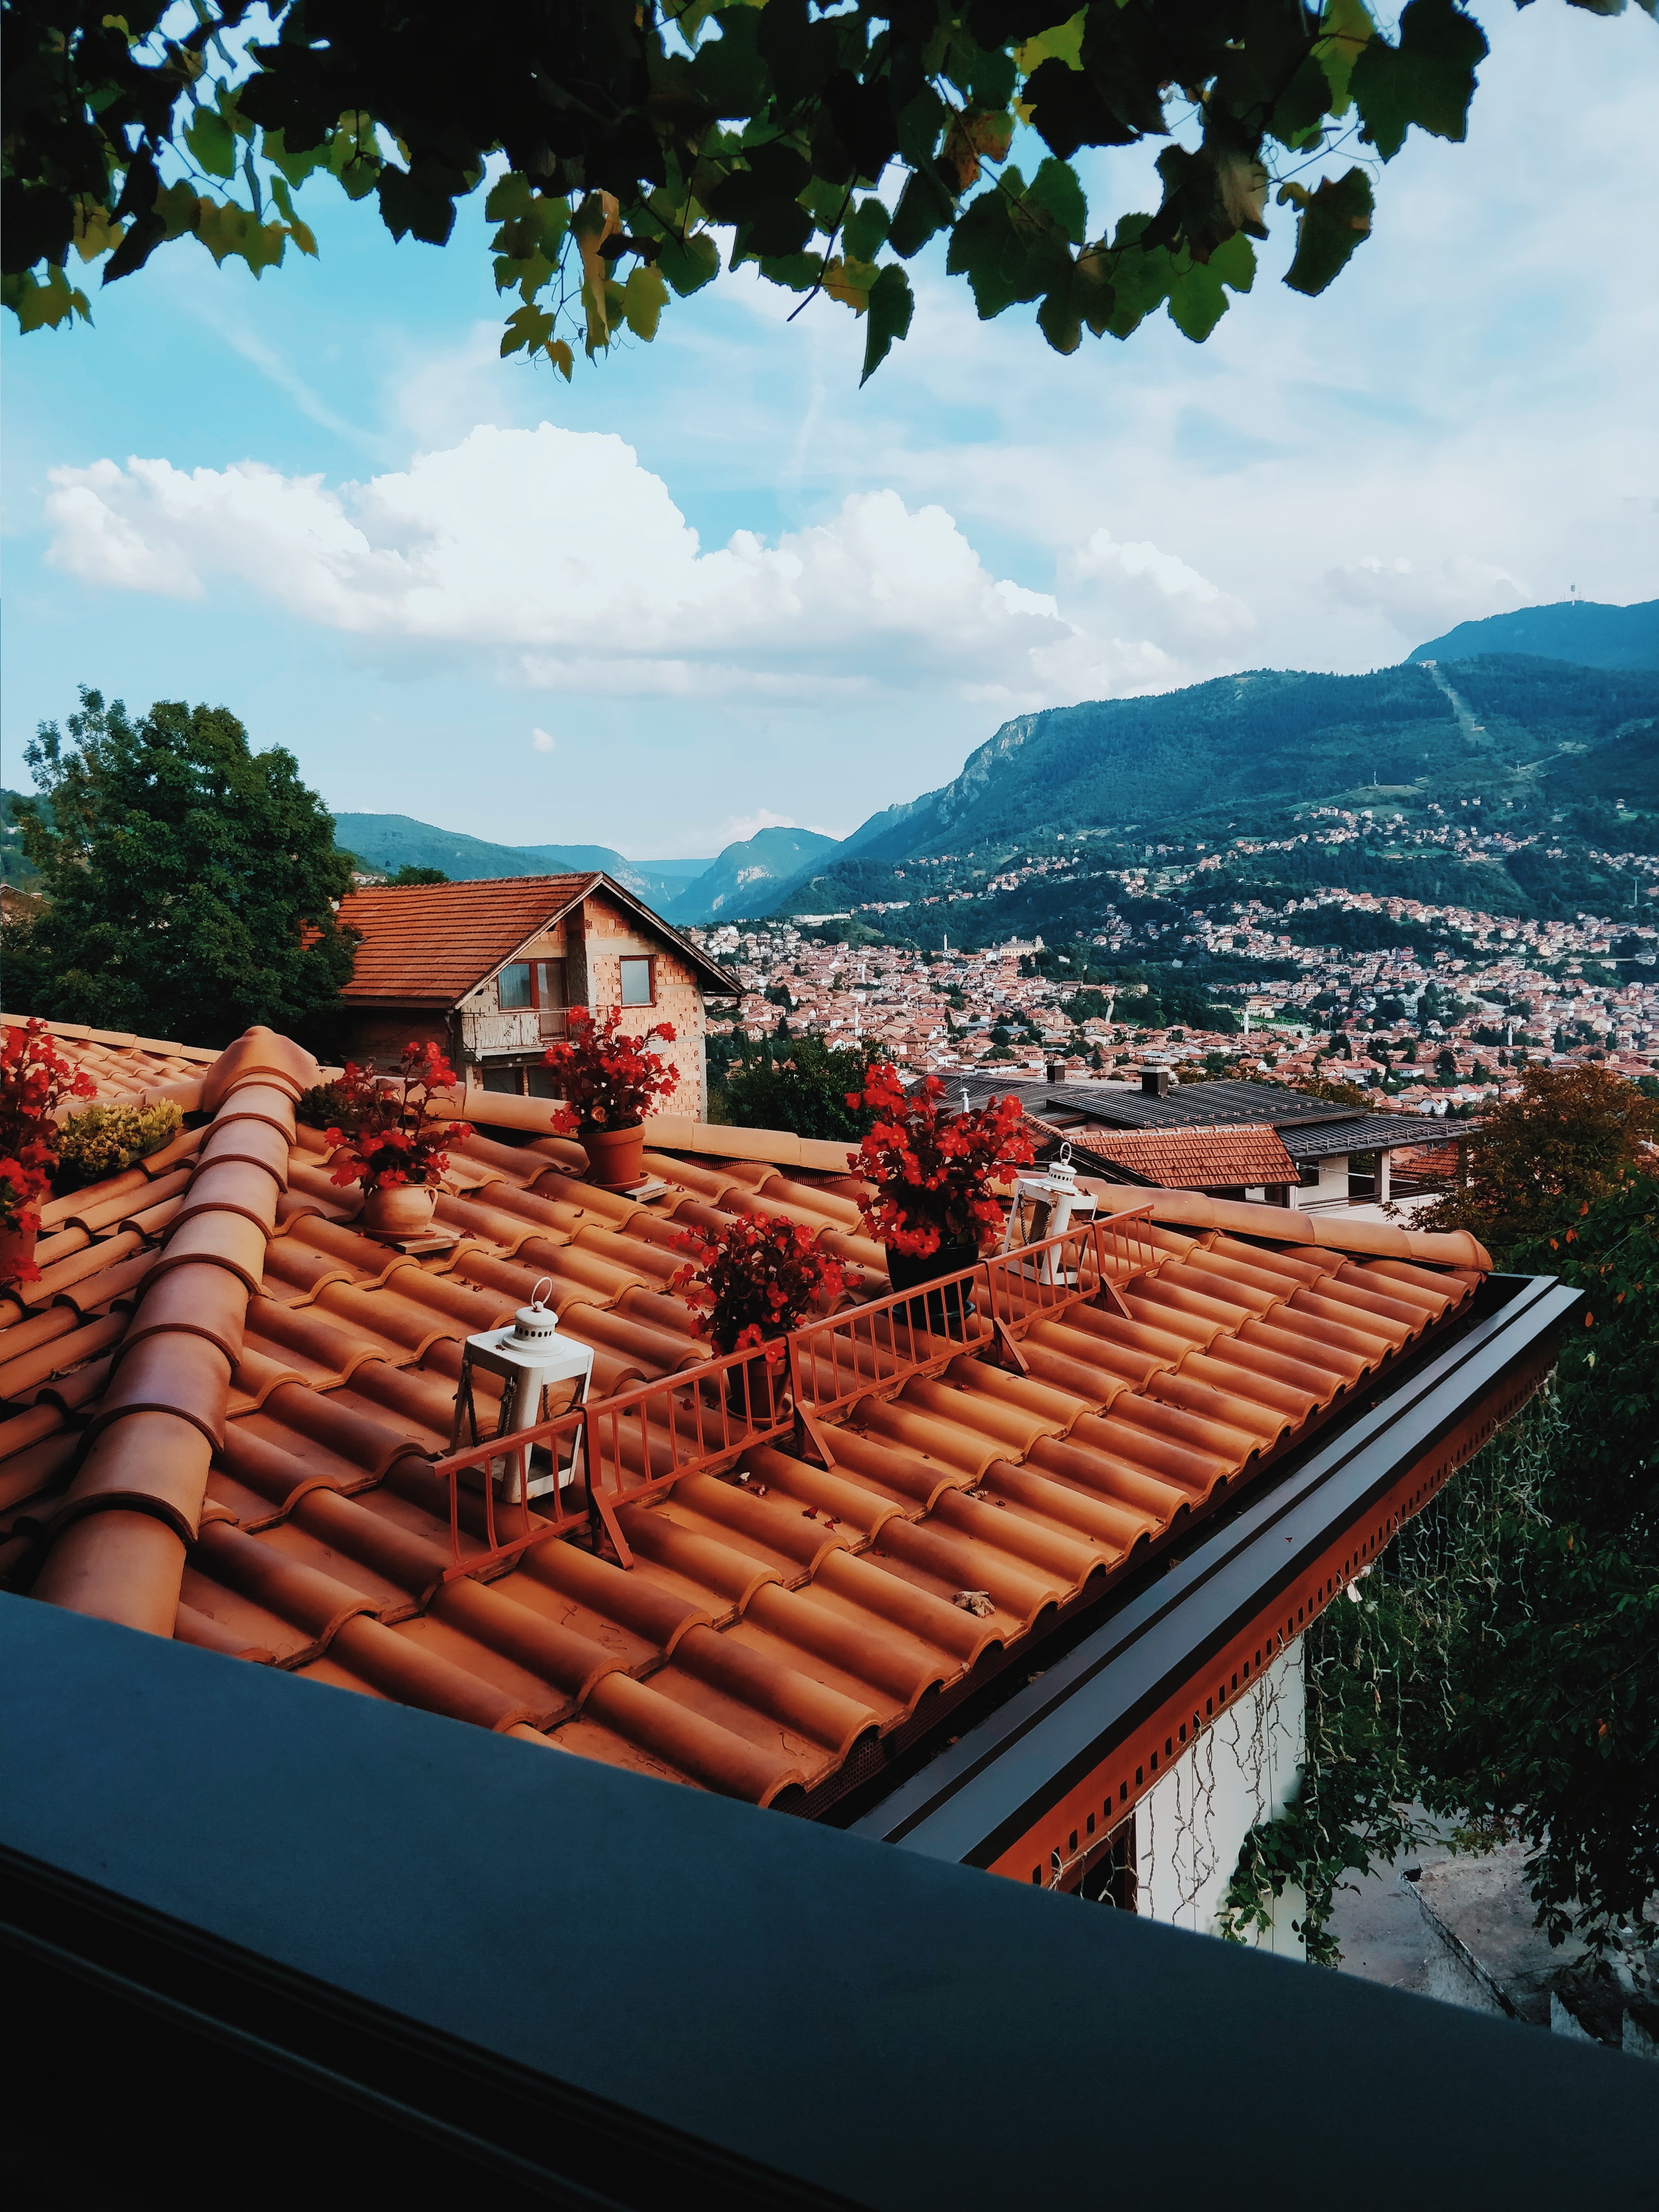 Choosing the Best Roofing for Your Home